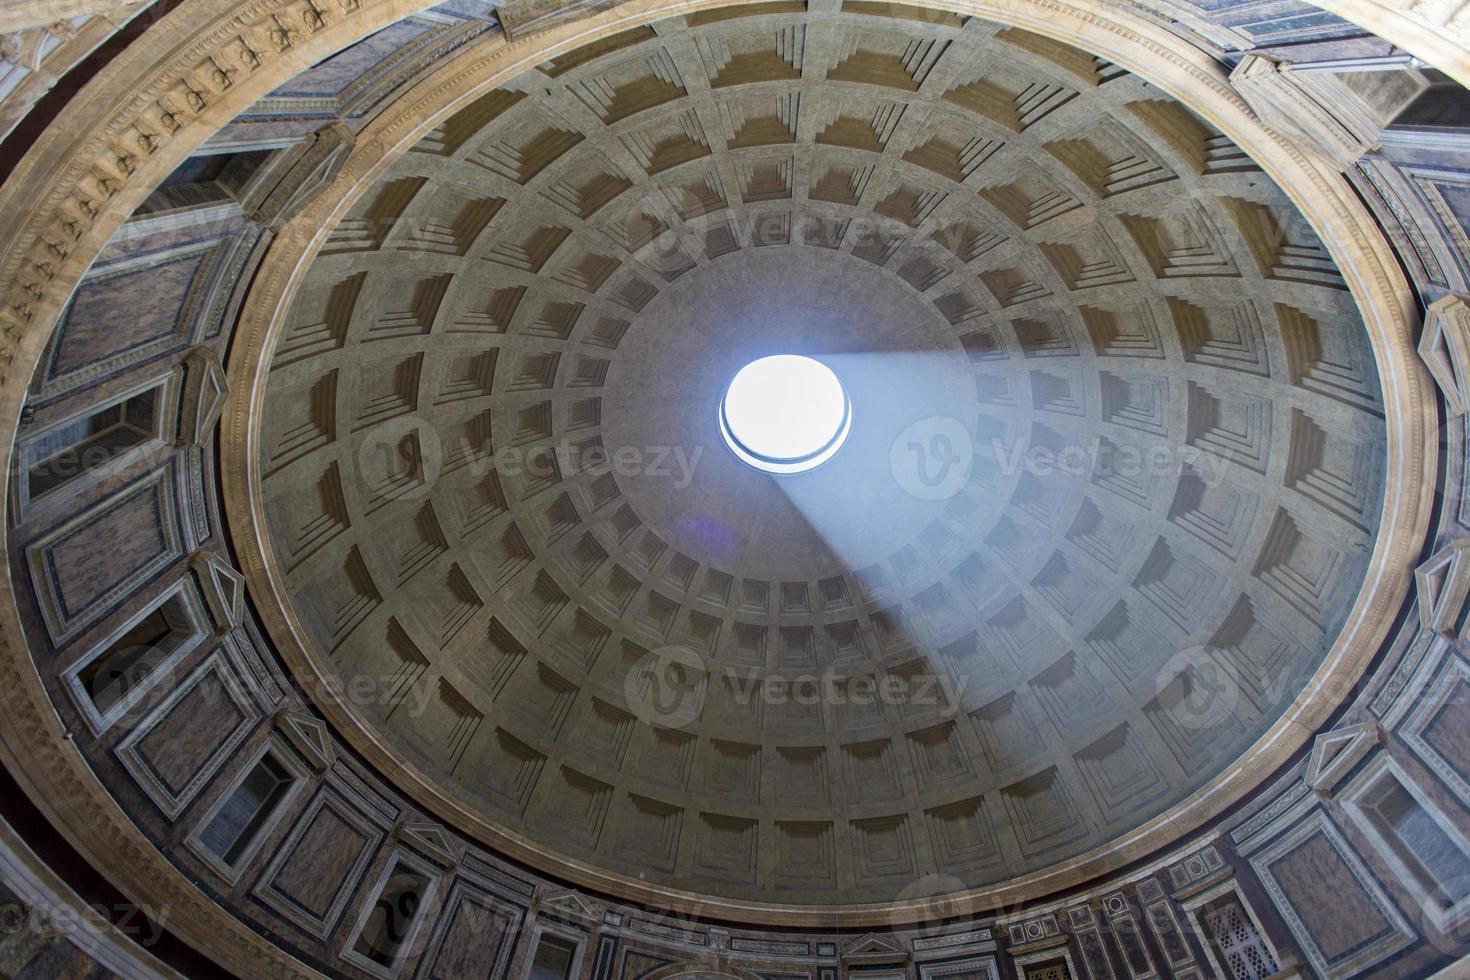 Pantheon in Rome, Italy photo